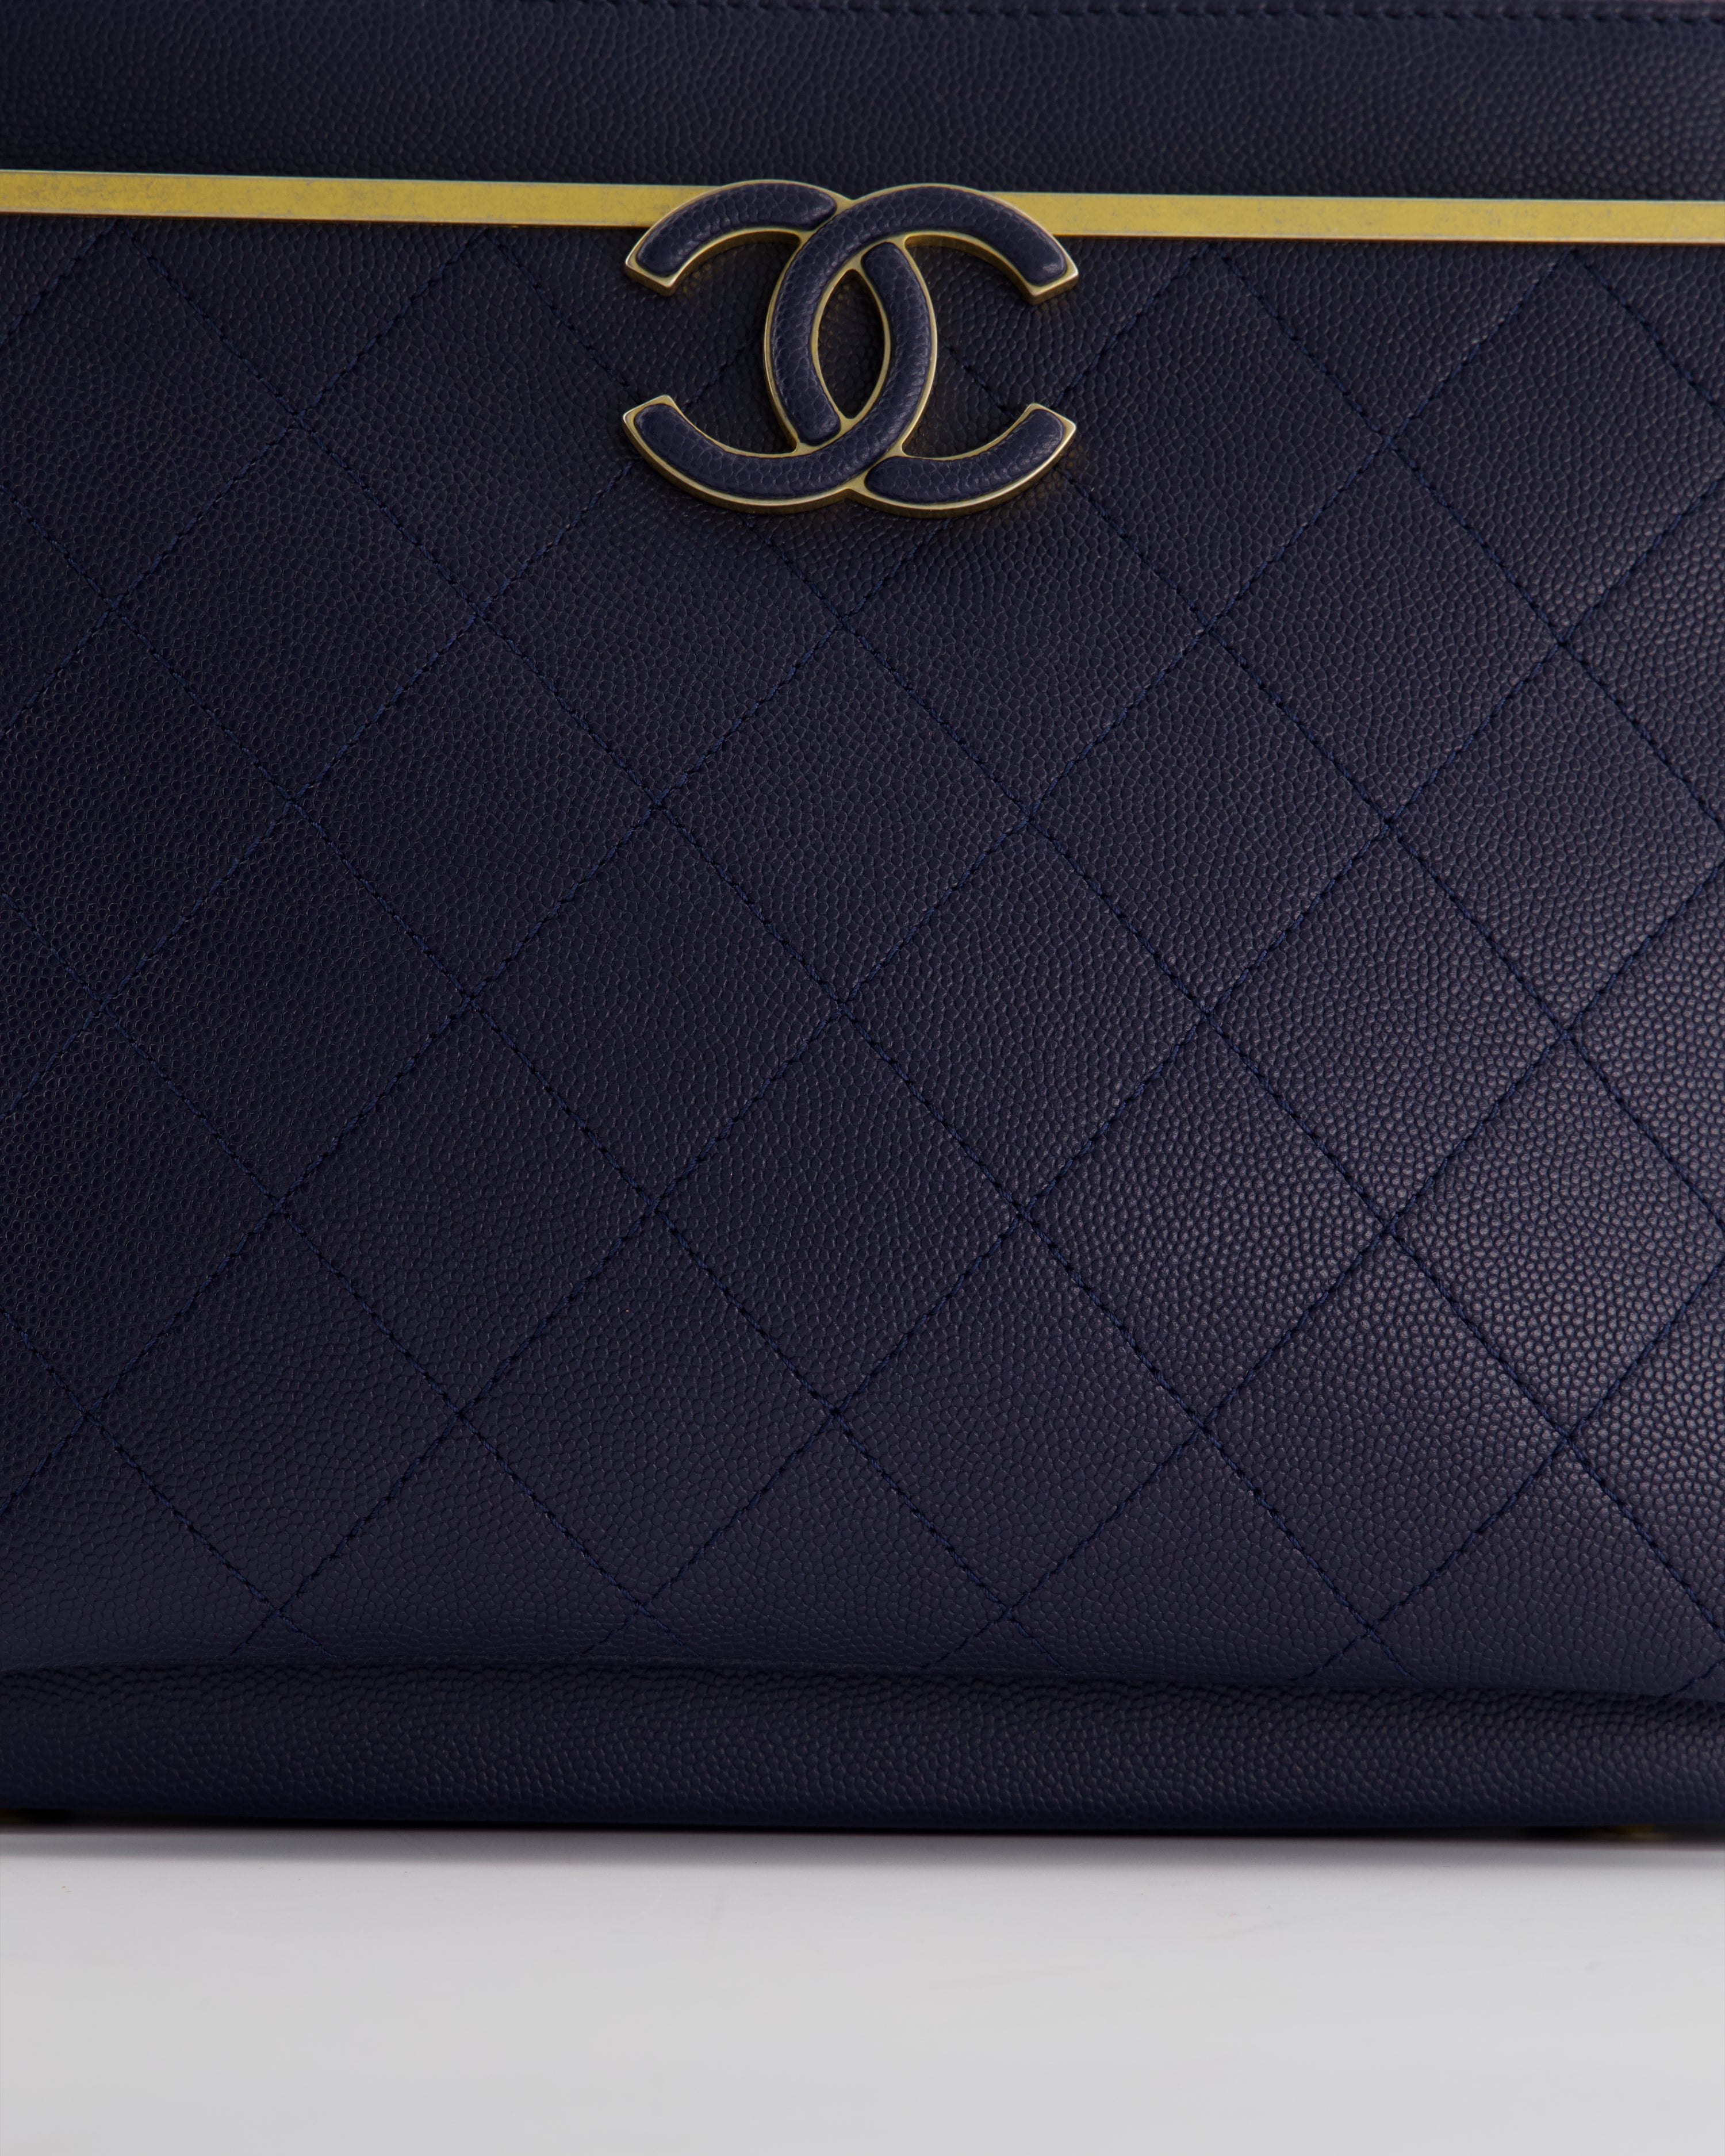 Chanel Navy Framed Business Affinity Bag in Caviar Leather with Brushed Gold Hardware